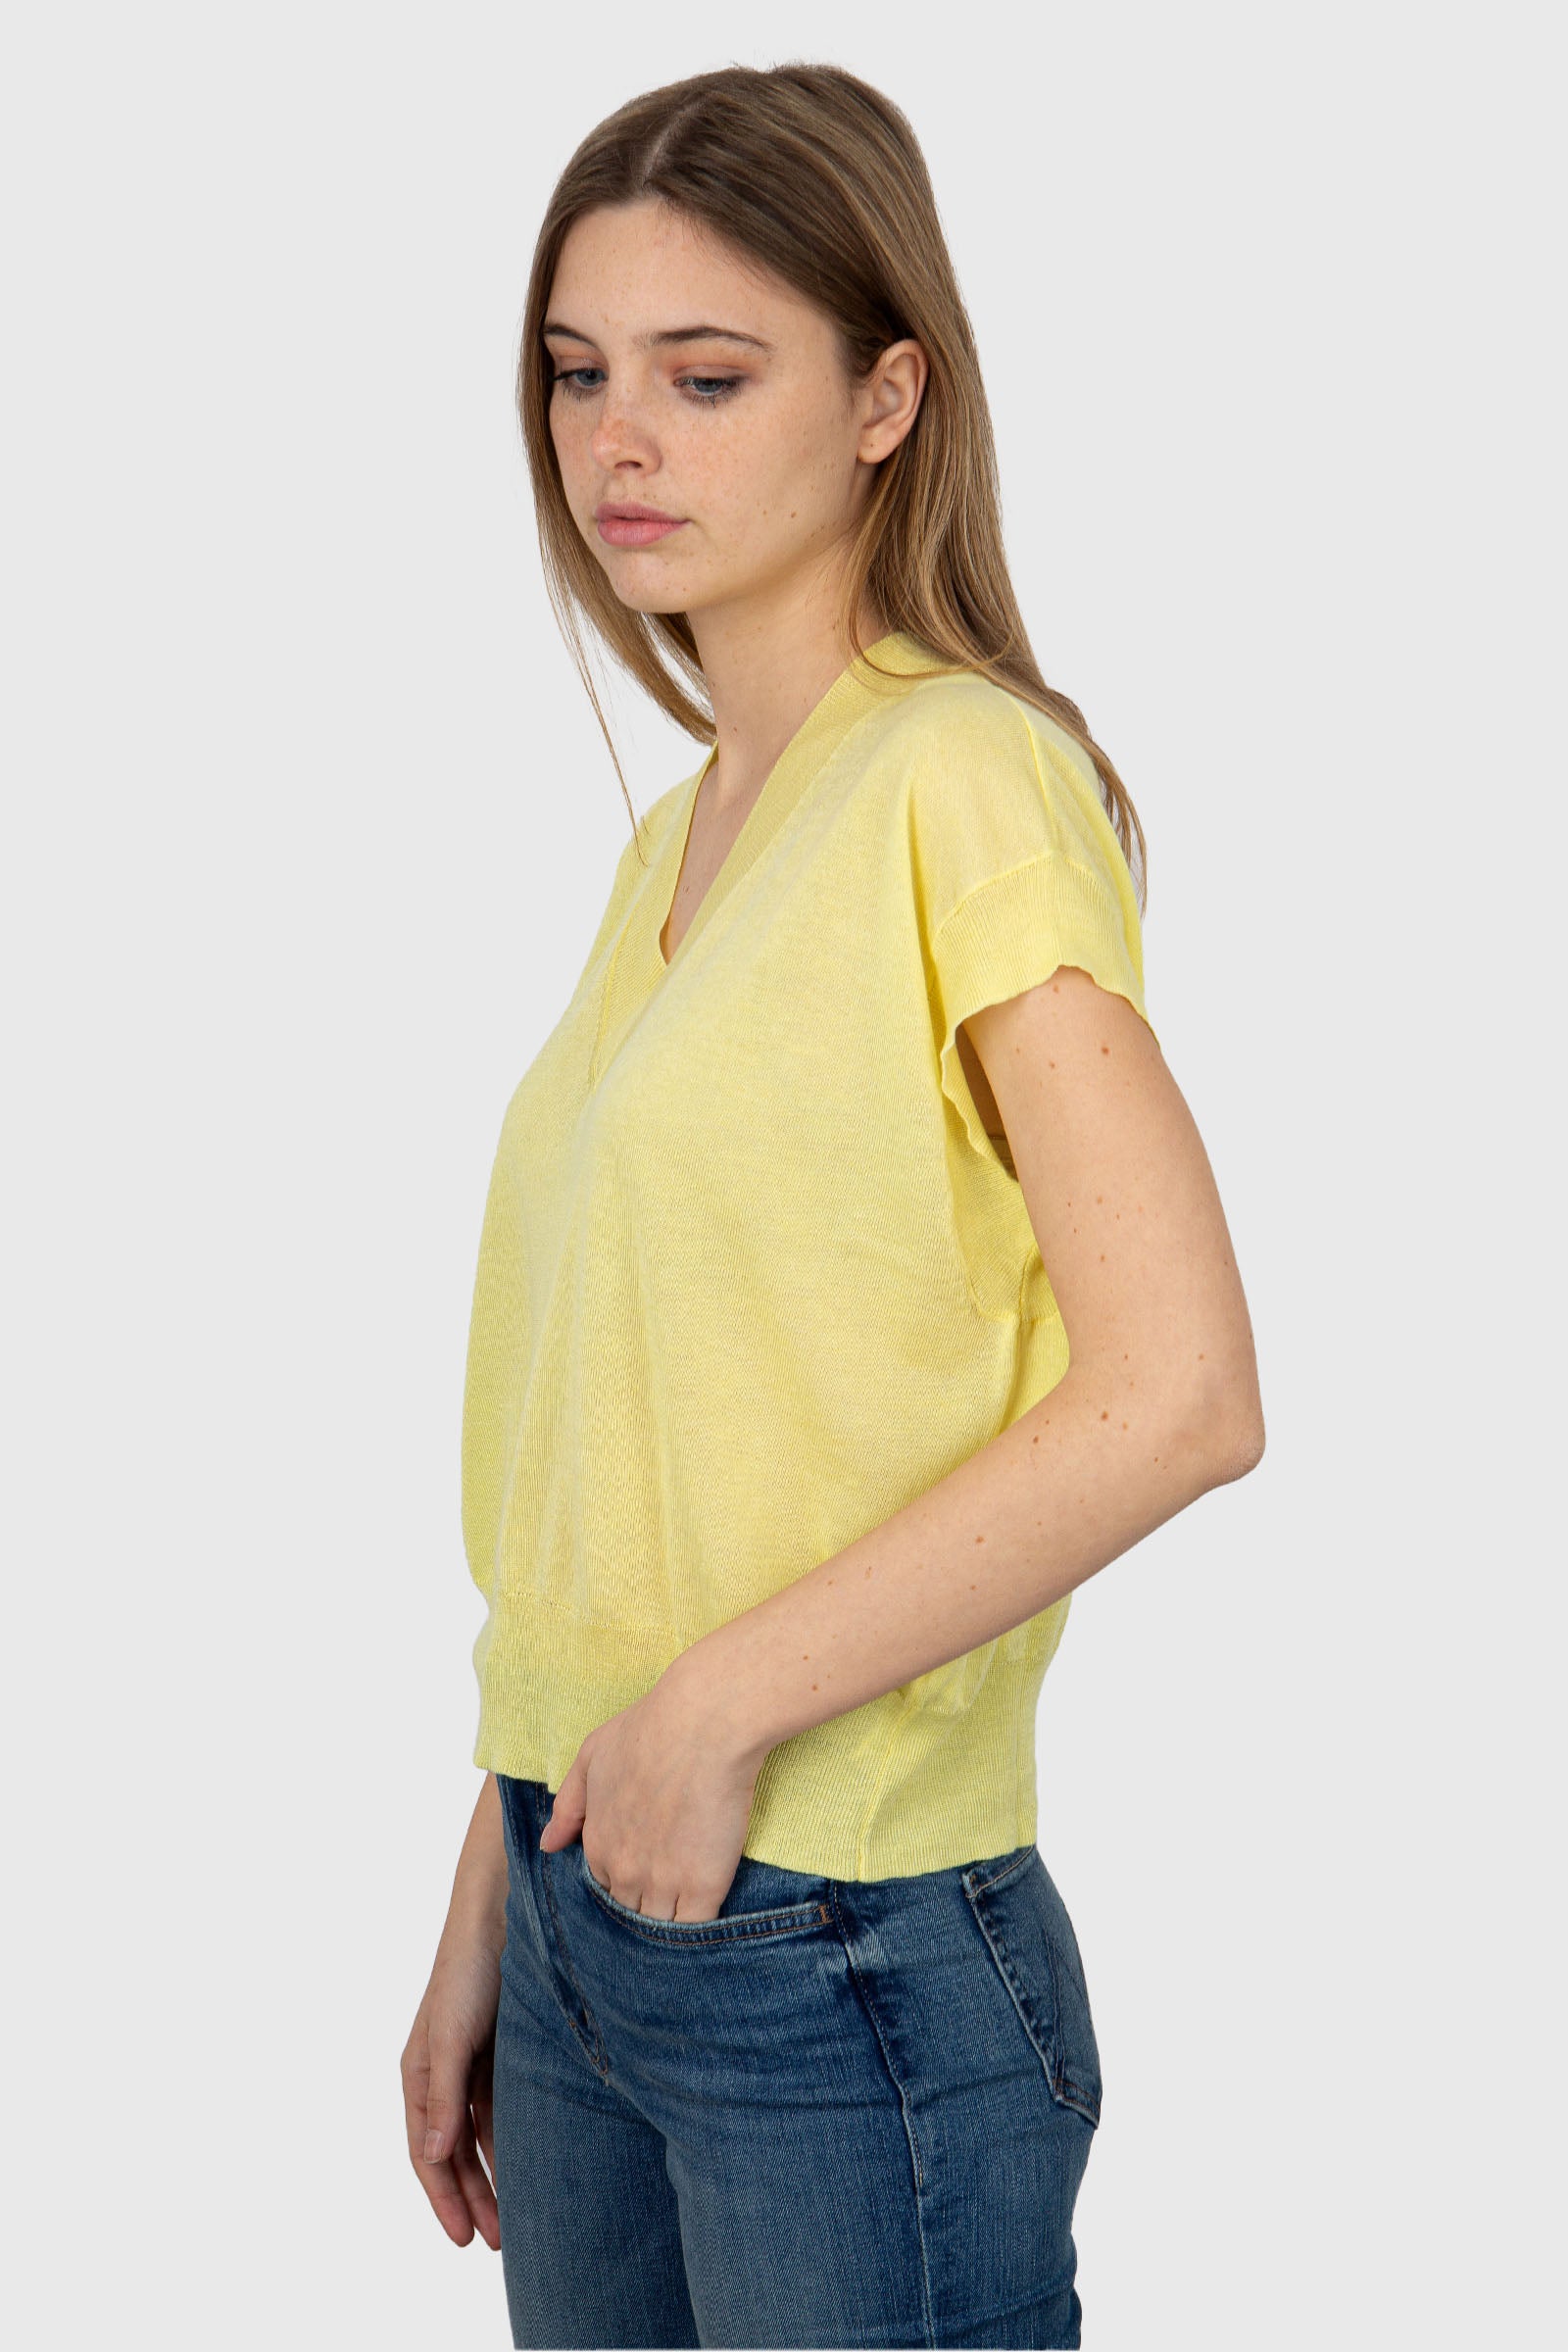 Absolut Cashmere Blair Synthetic Yellow Sweater - 3